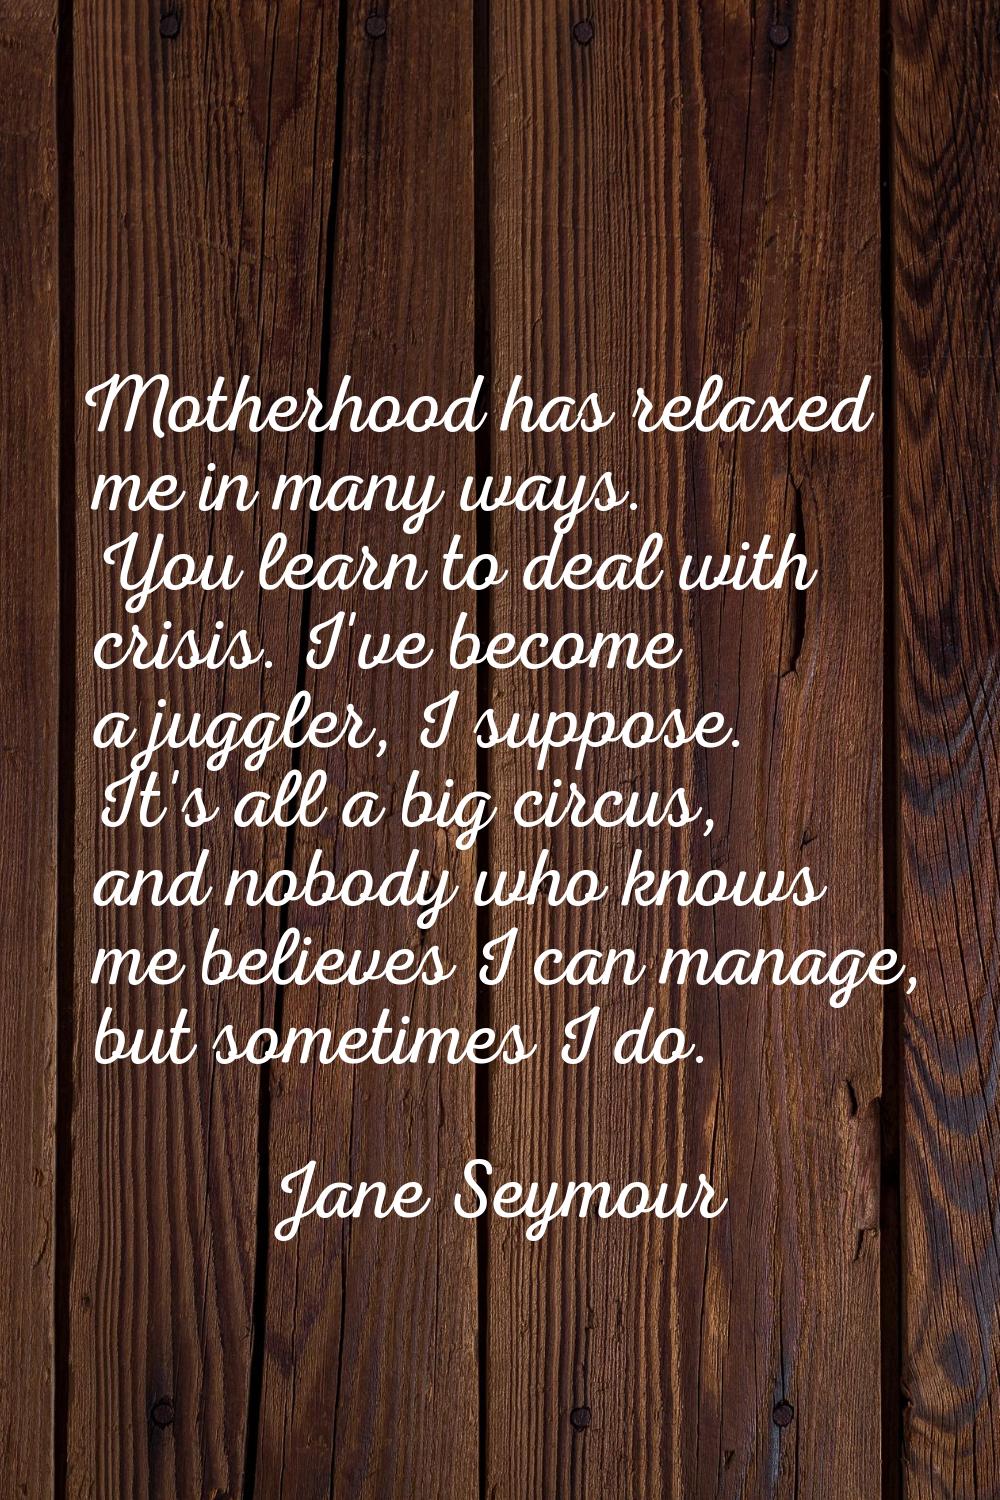 Motherhood has relaxed me in many ways. You learn to deal with crisis. I've become a juggler, I sup